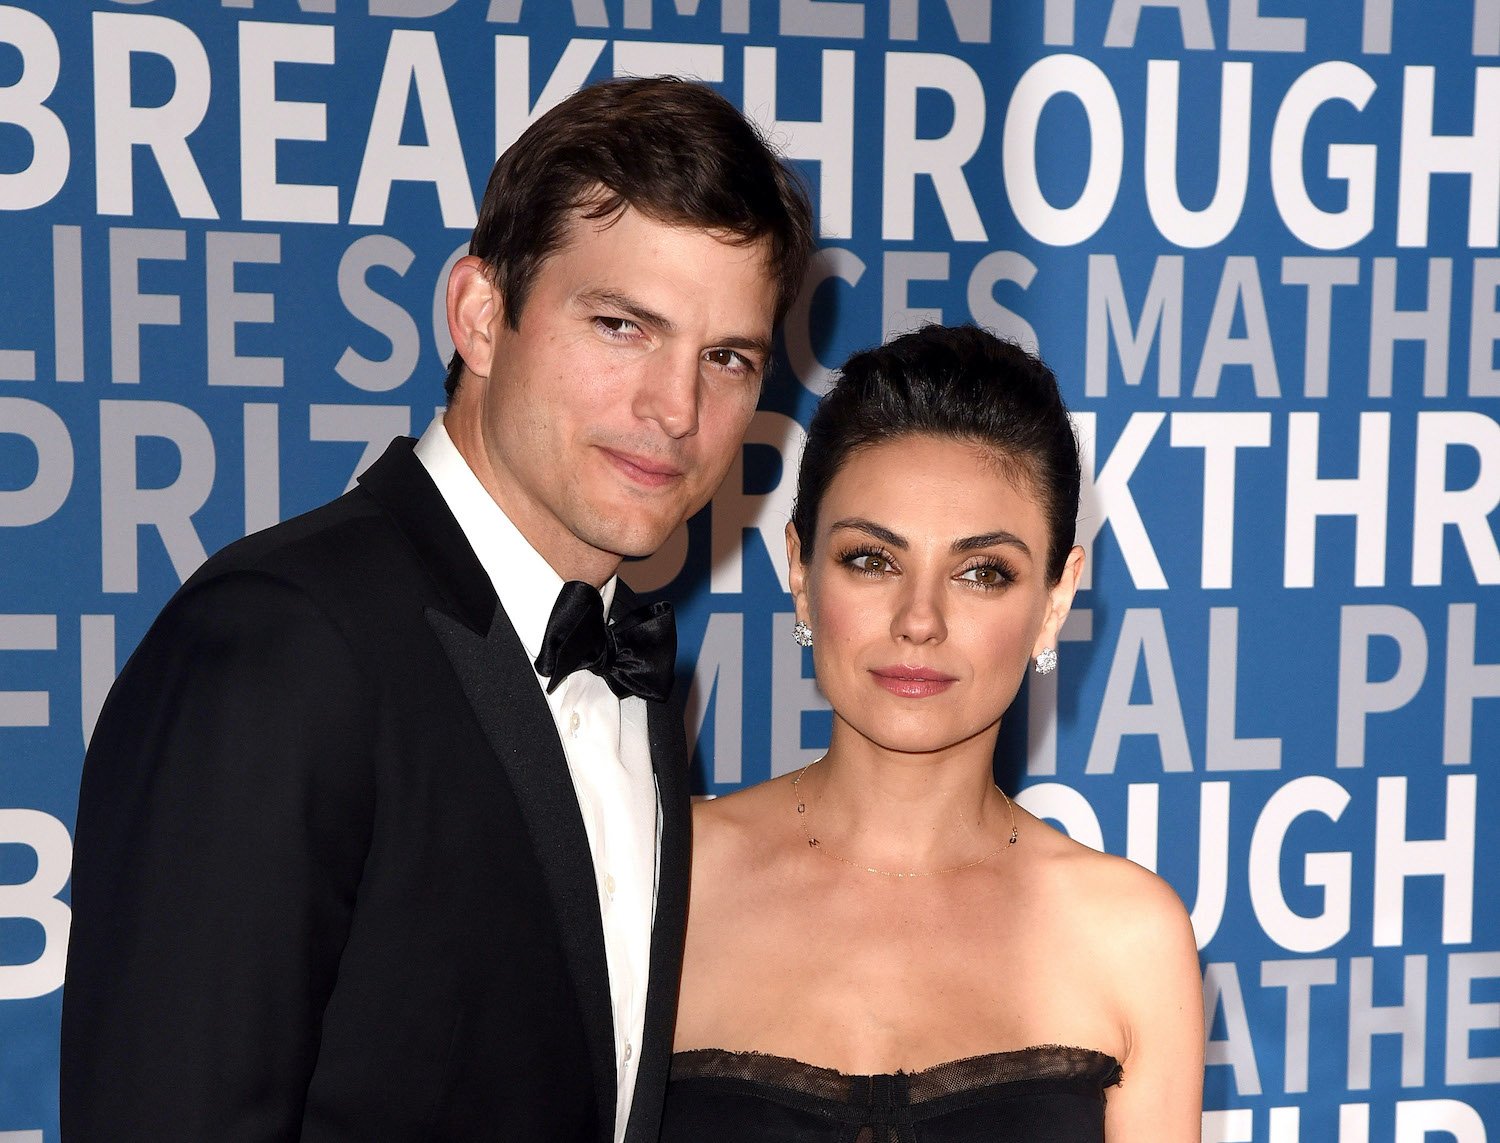 Ashton Kutcher and Mila Kunis stand together and pose for cameras at the 6th Annual Breakthrough Prize at NASA Ames Research Center on December 3, 2017